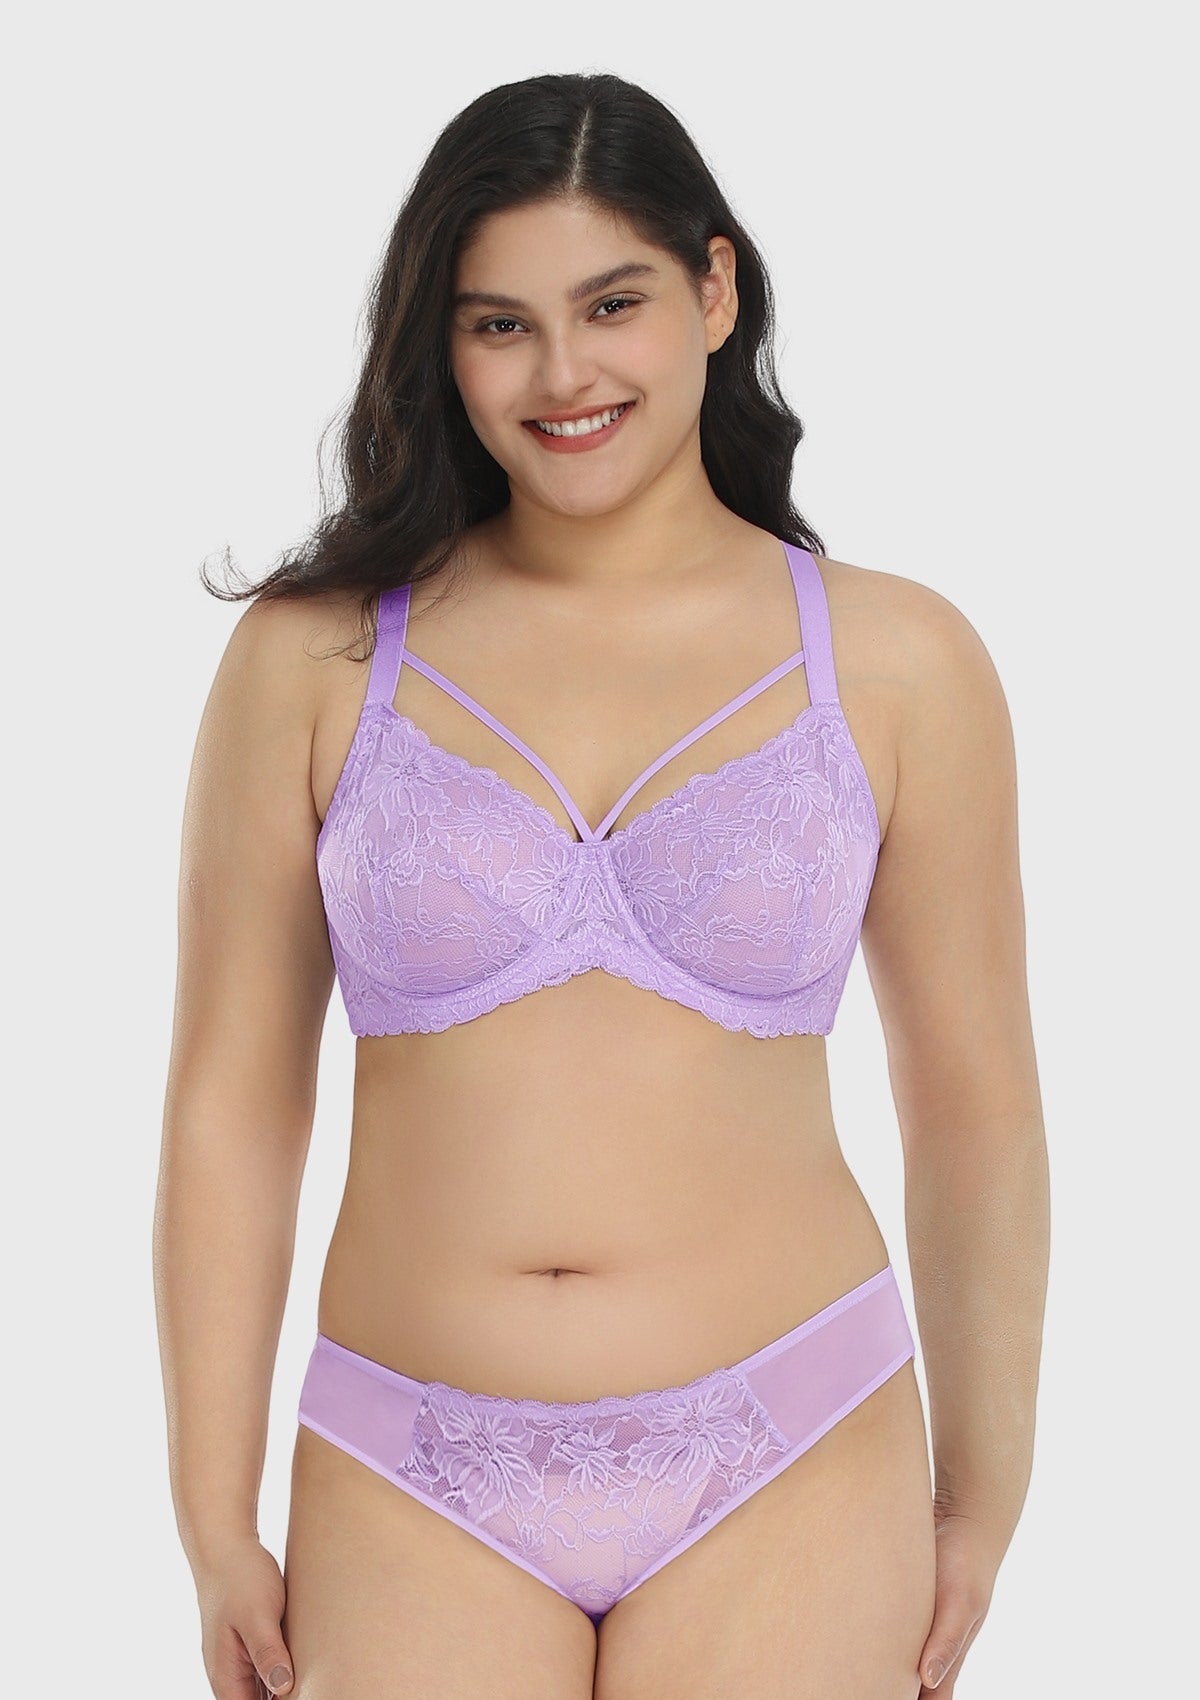 HSIA Pretty In Petals See-Through Lace Bra: Lift And Separate - Light Gray / 34 / D